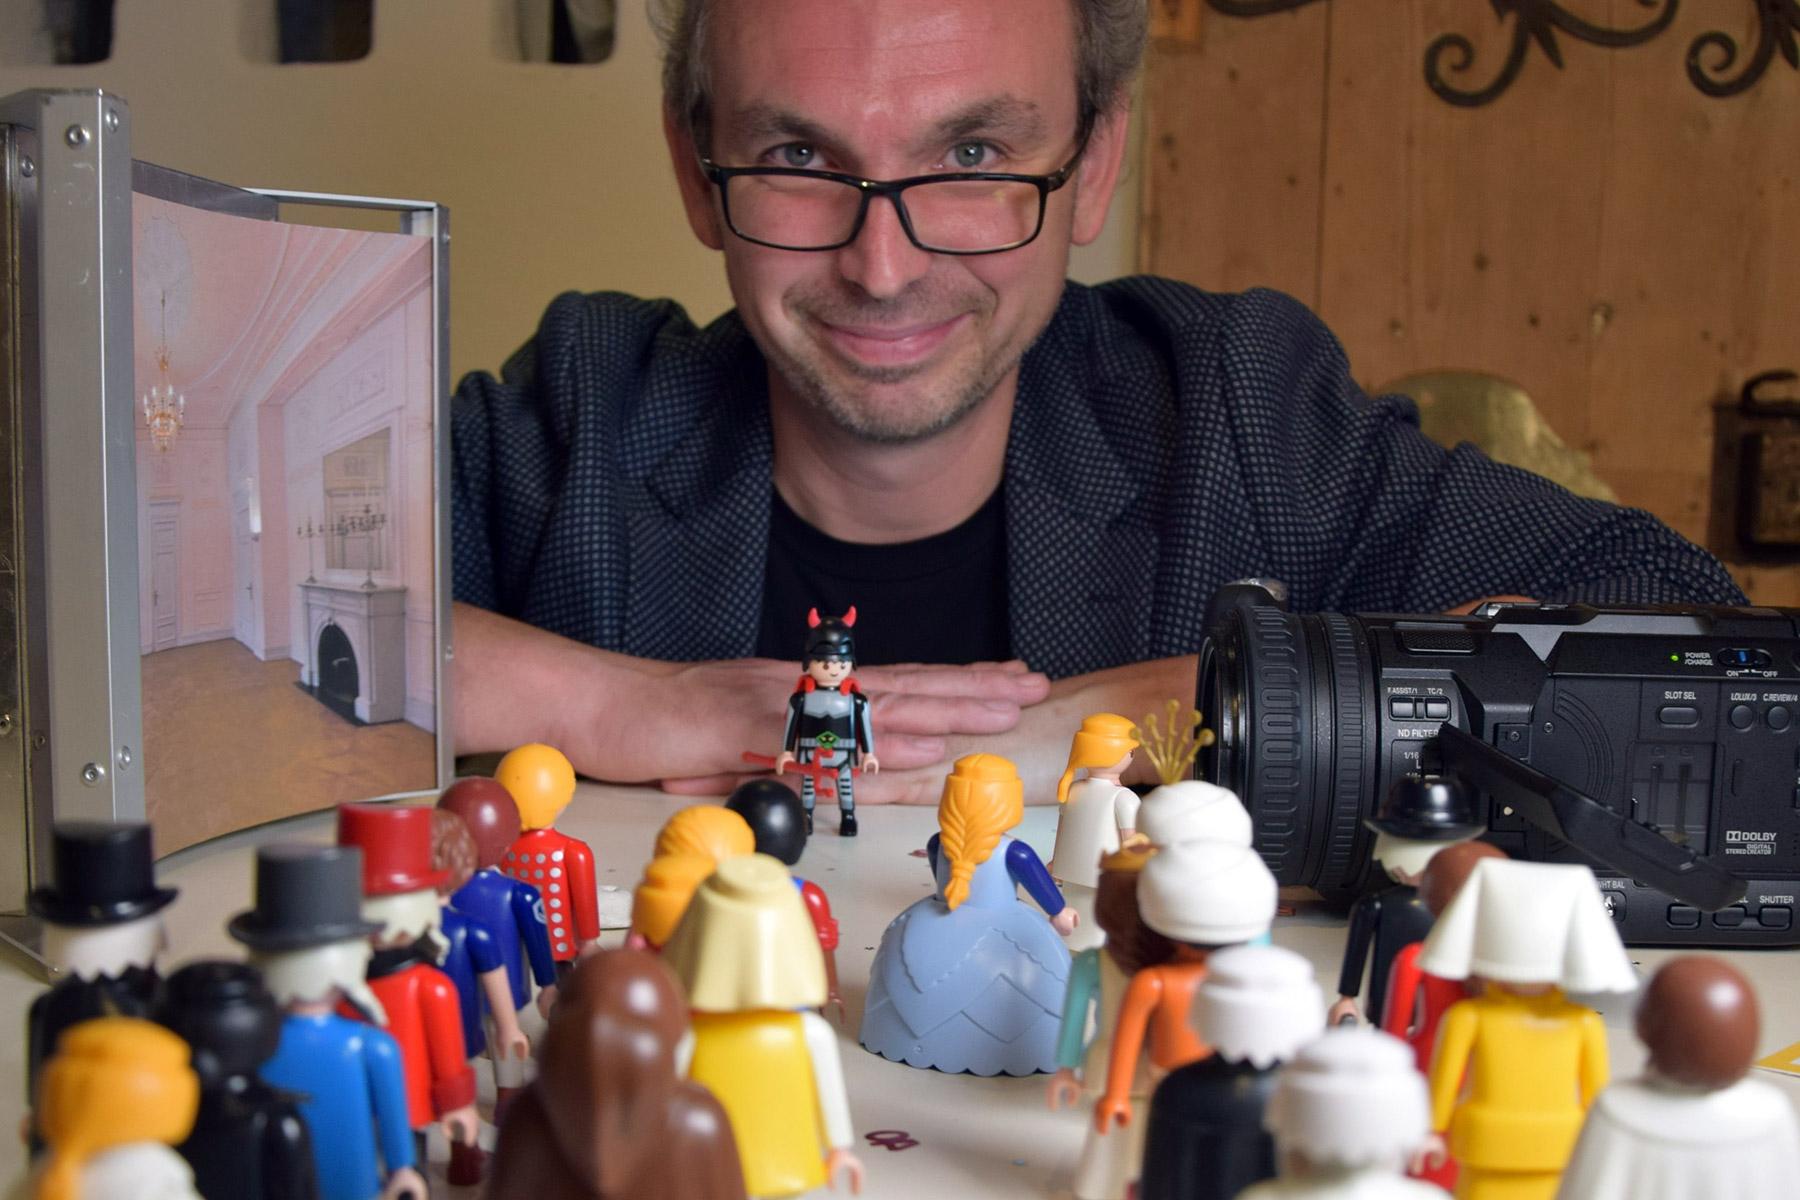 German Youtuber Michael Sommer presents Biblical books with Playmobil figures. Photo: GEP, Klaus Wankmiller